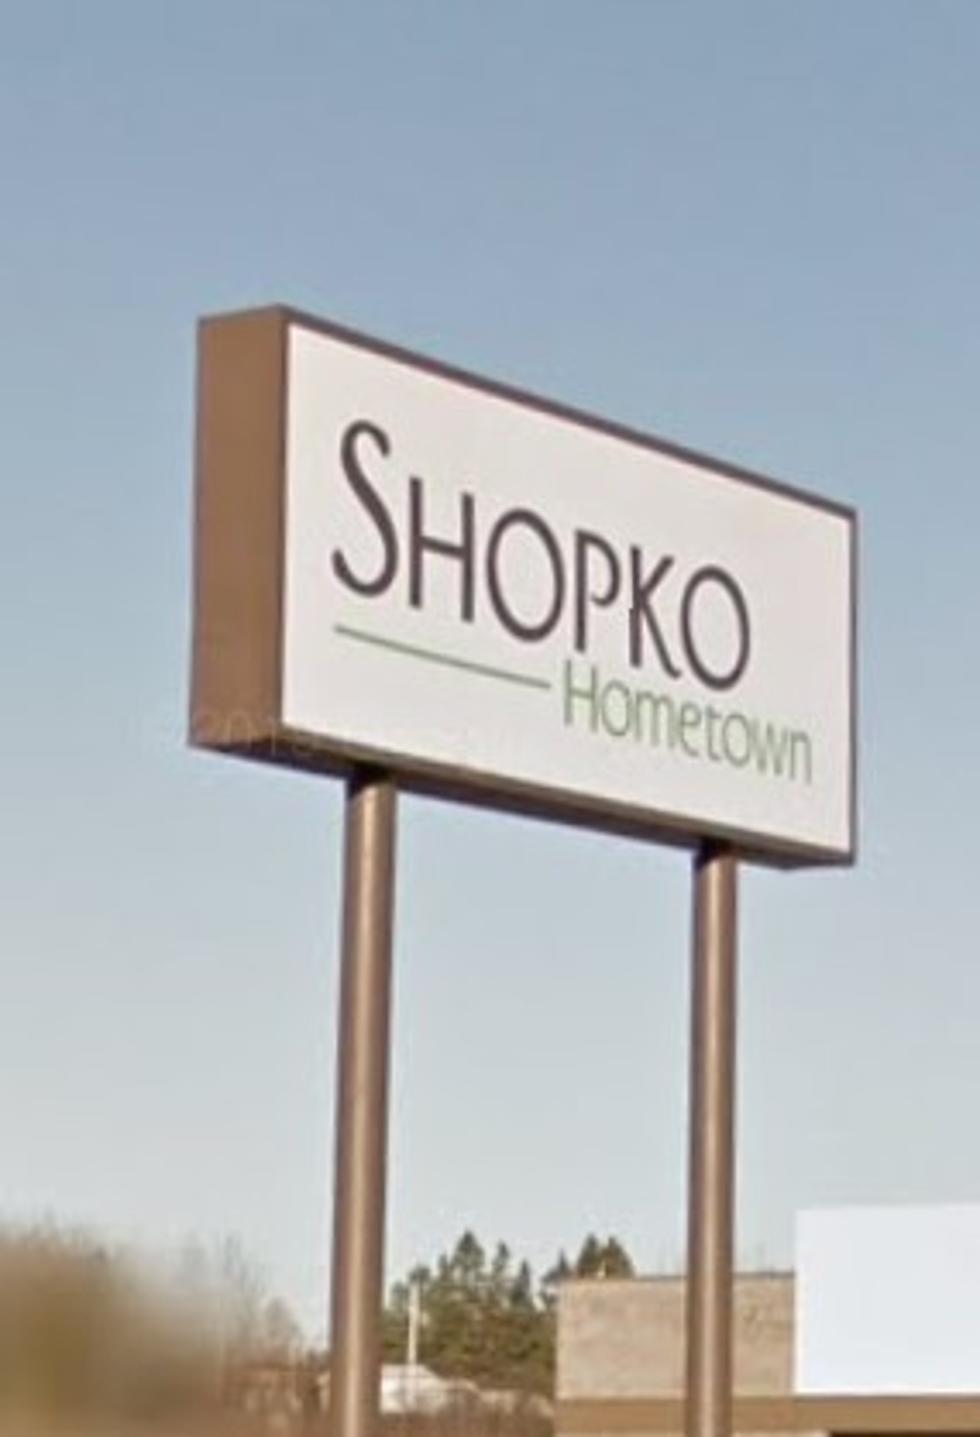 A New Locally Owned Store Will Fill The Empty Shopko Building In Two Harbors